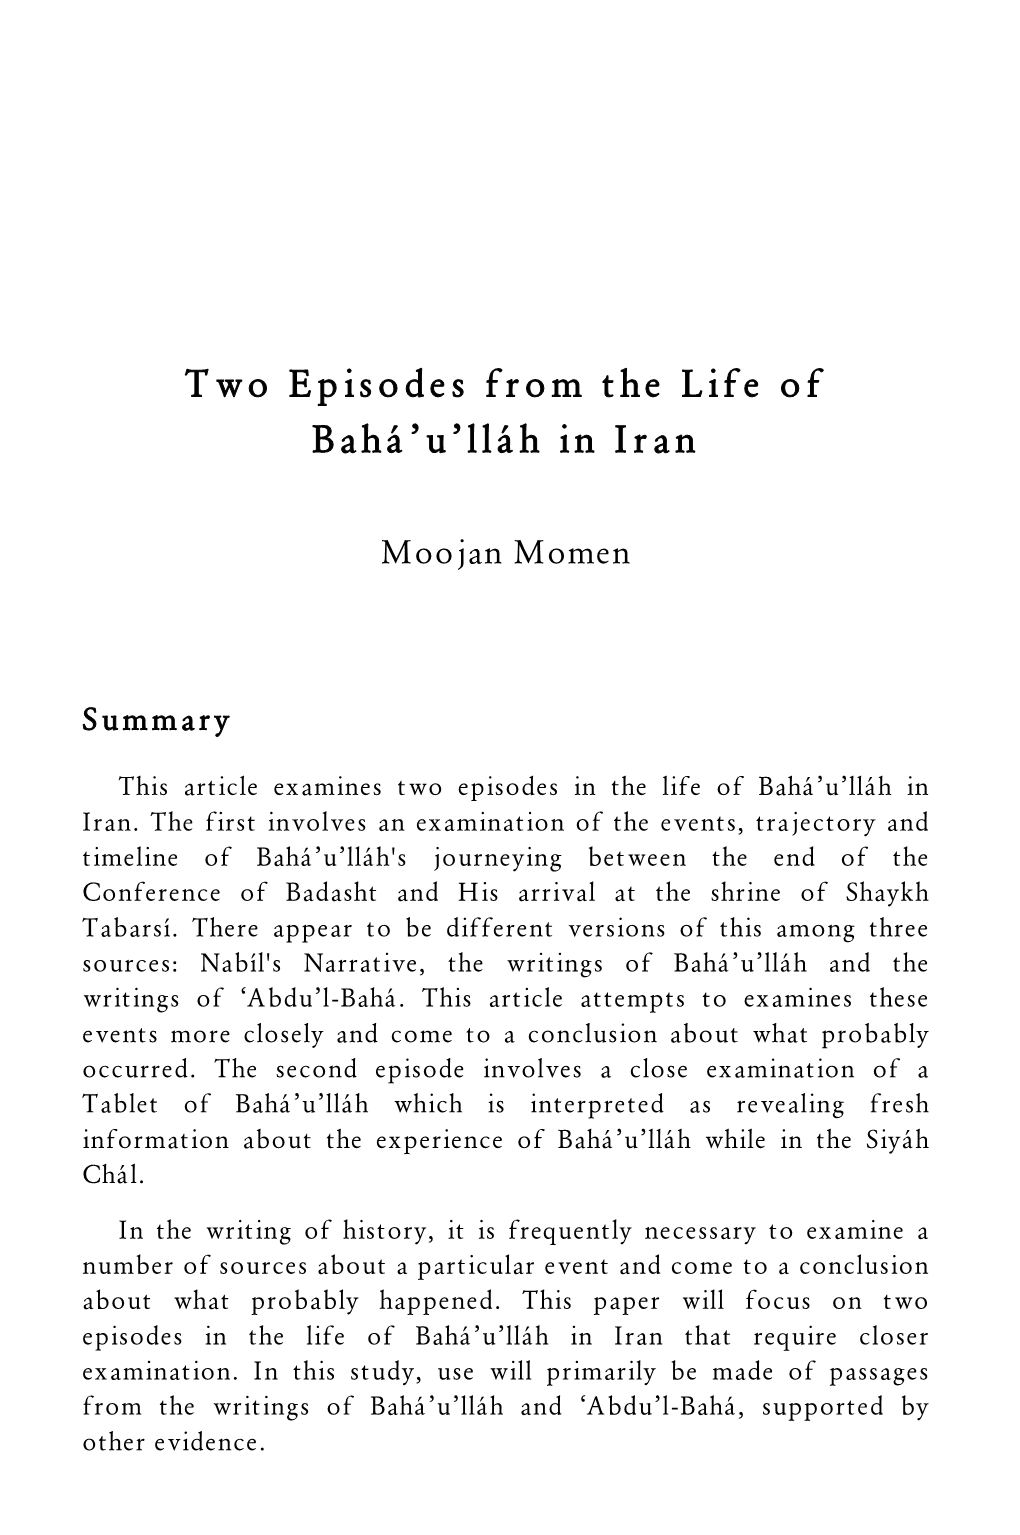 Two Episodes from the Life of Bahá'u'lláh in Iran